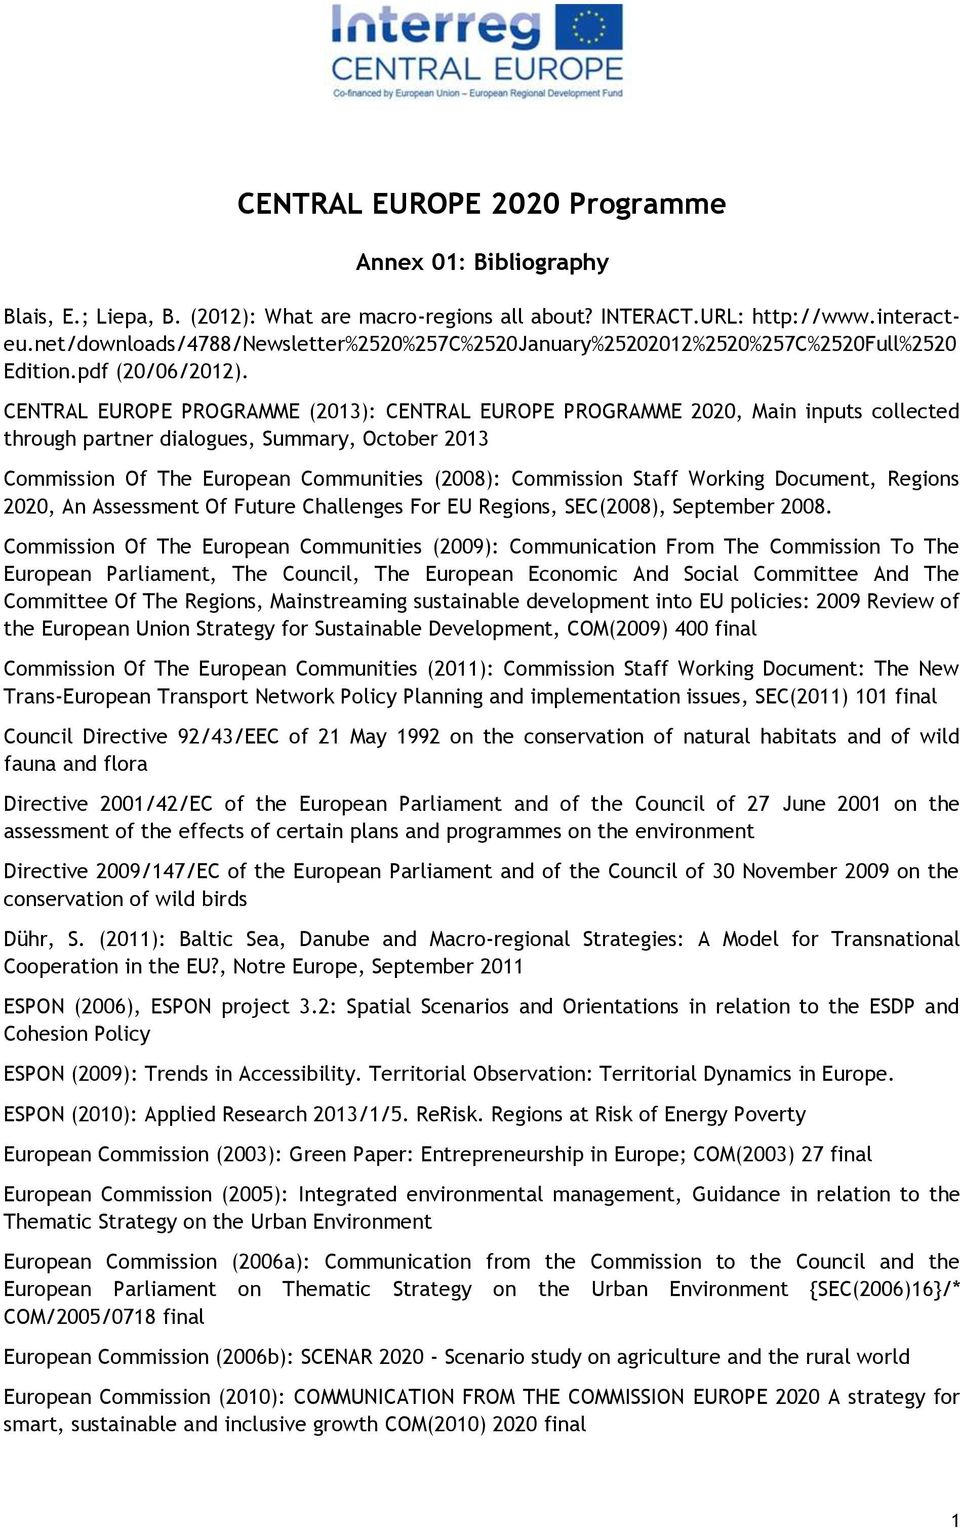 CENTRAL EUROPE PROGRAMME (2013): CENTRAL EUROPE PROGRAMME 2020, Main inputs collected through partner dialogues, Summary, October 2013 Commission Of The European Communities (2008): Commission Staff